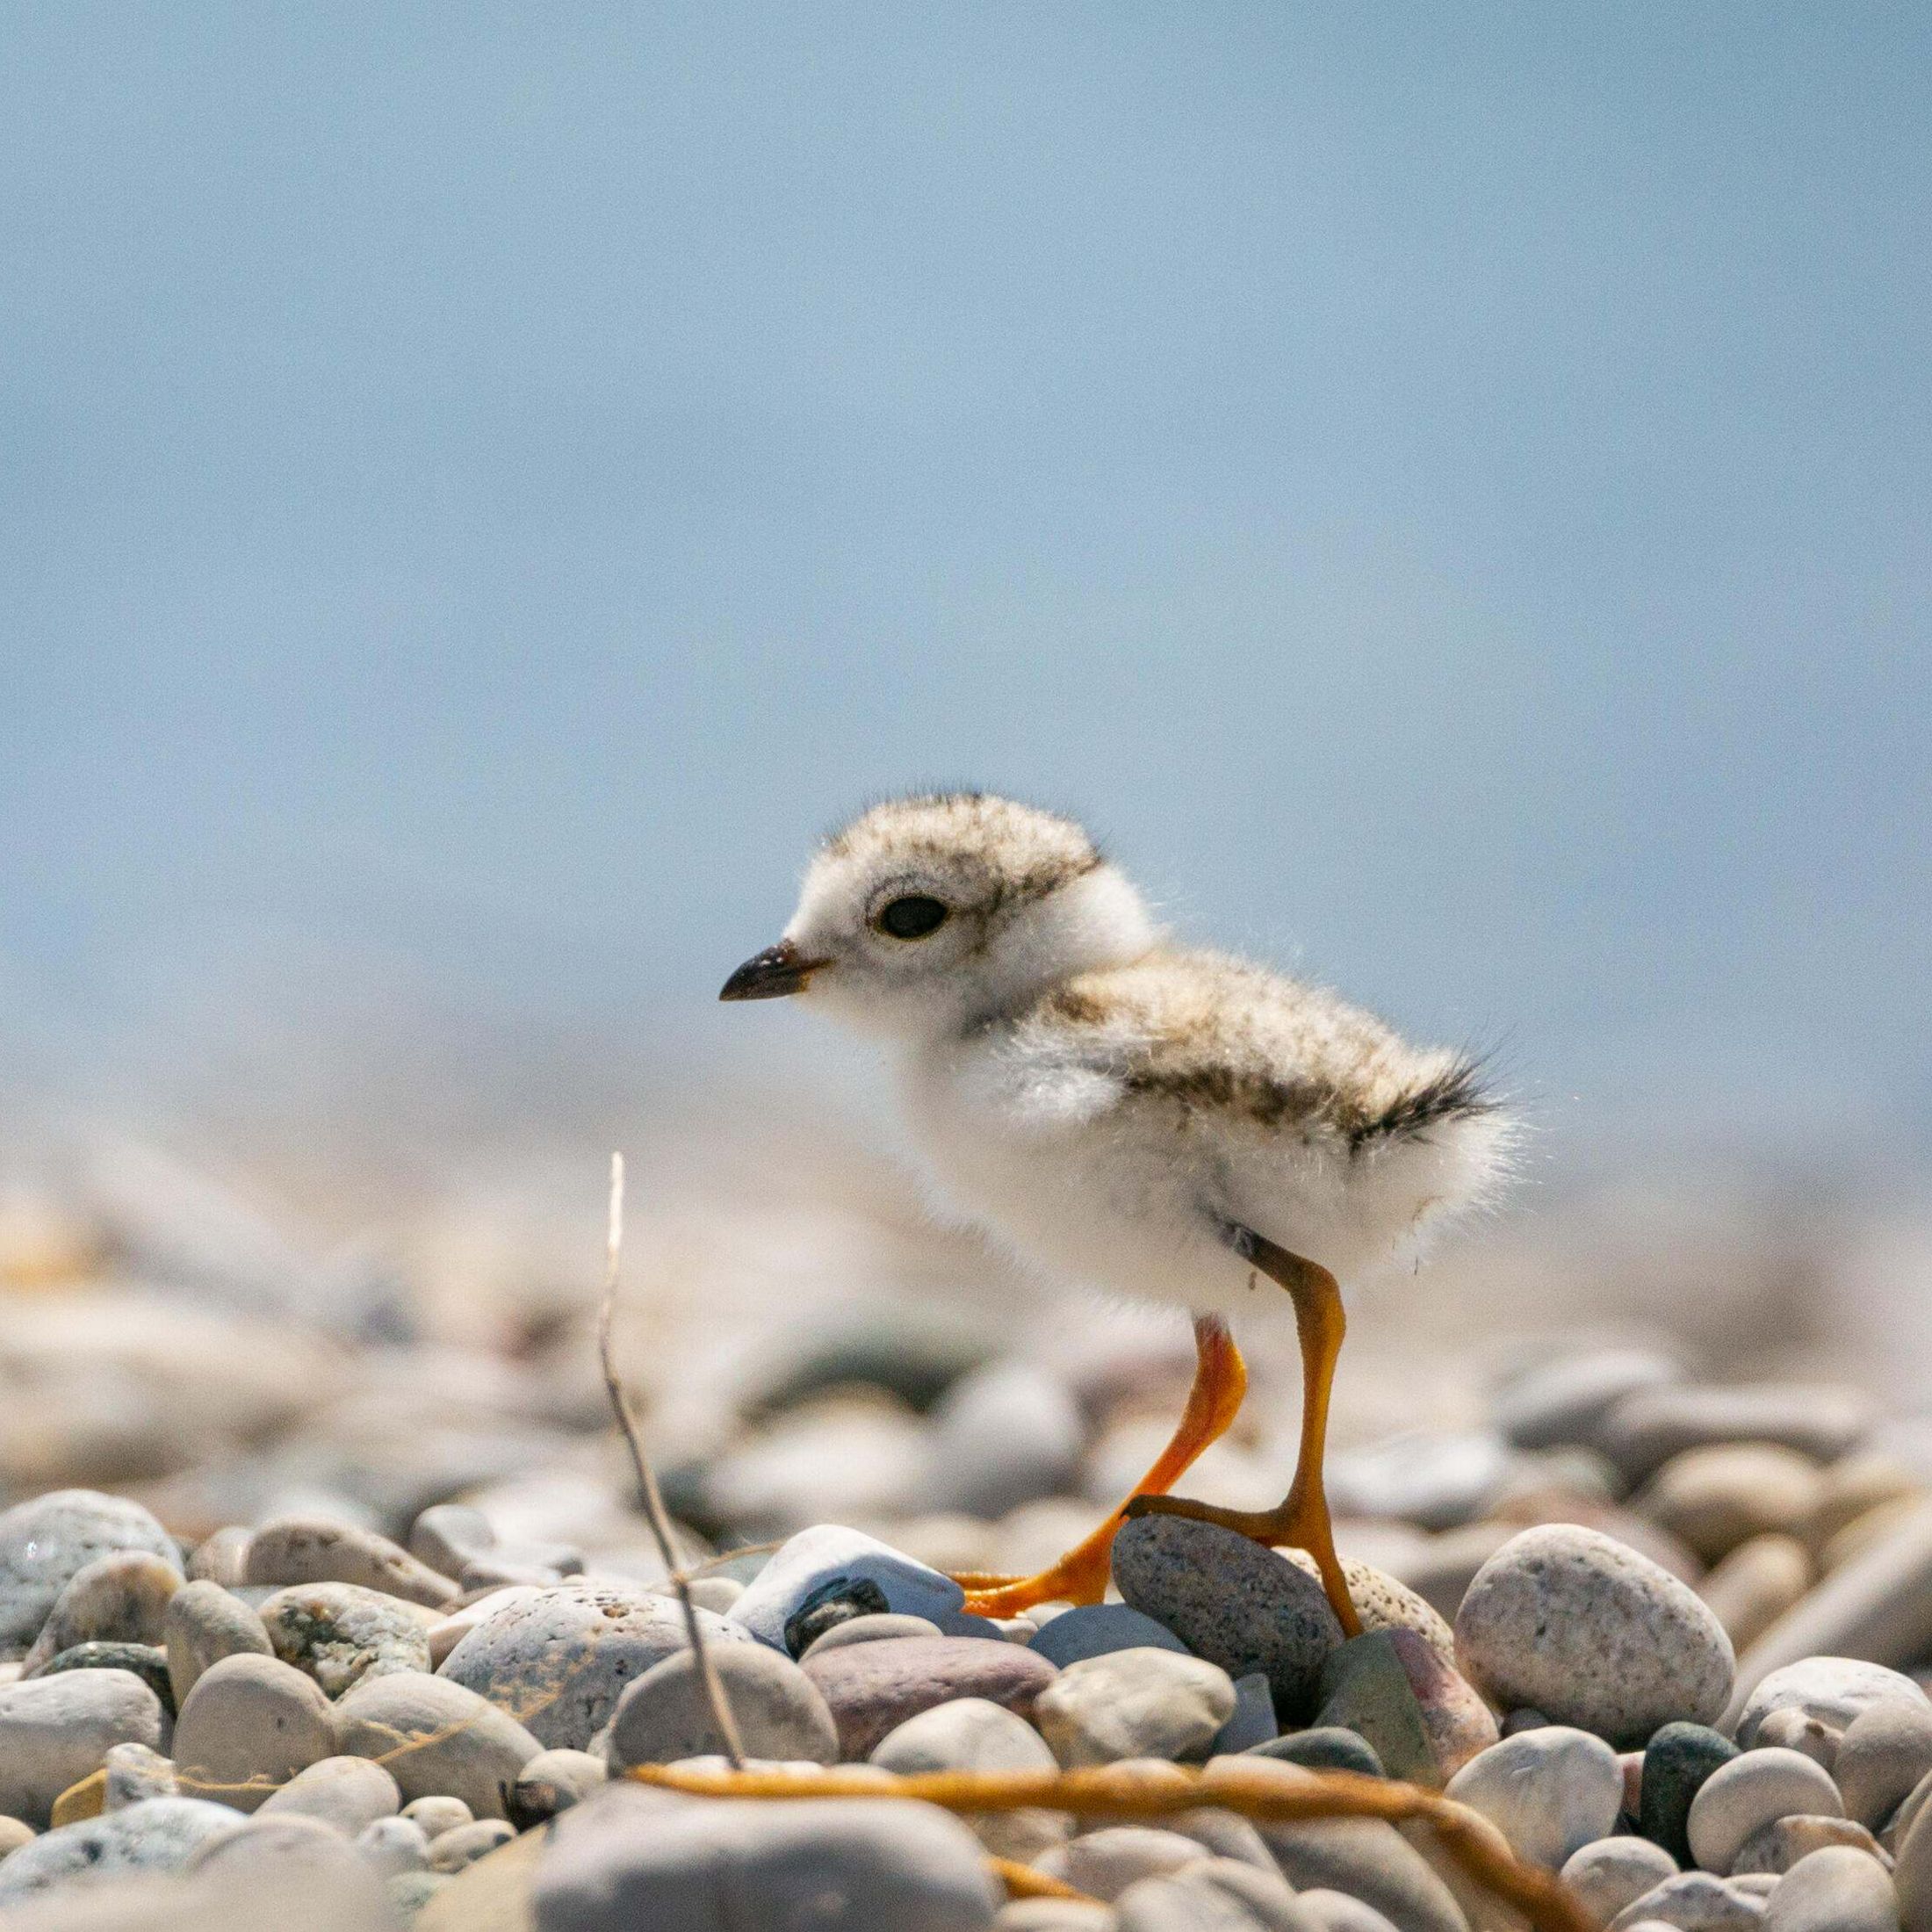 A piping plover chick walks along a beach in Michigan.